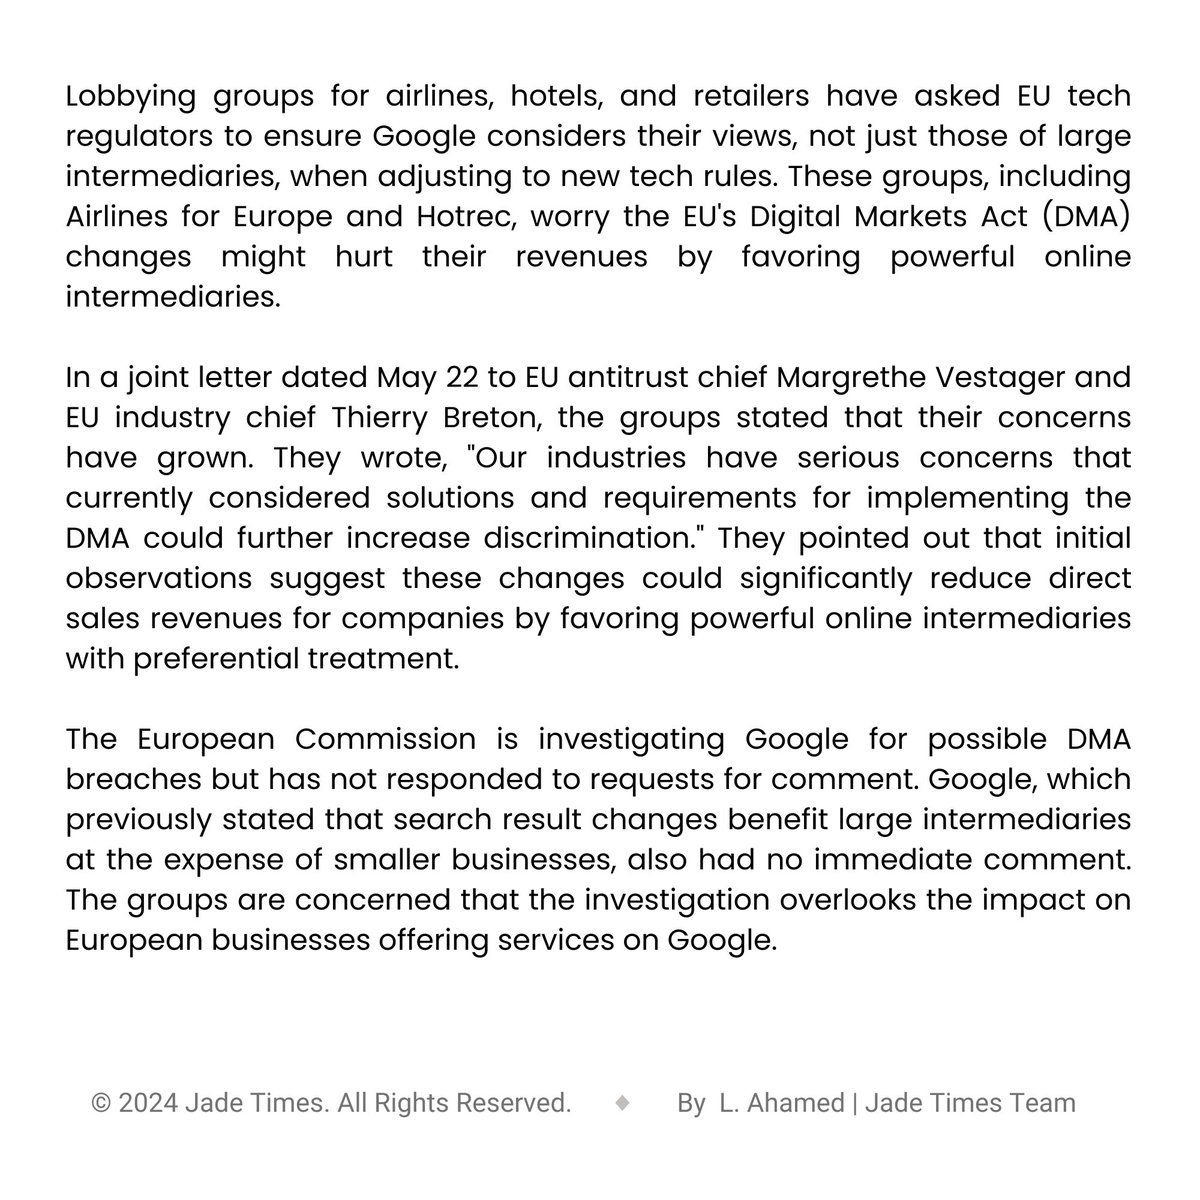 Airlines, hotels, and retailers are worried about being overlooked.
——
Lobbying groups for airlines, hotels, and retailers urge EU regulators to ensure Google's DMA compliance considers their views. 
——
Visit the link in our bio.
#jadetimes #TechRegulation #DigitalMarketsAct